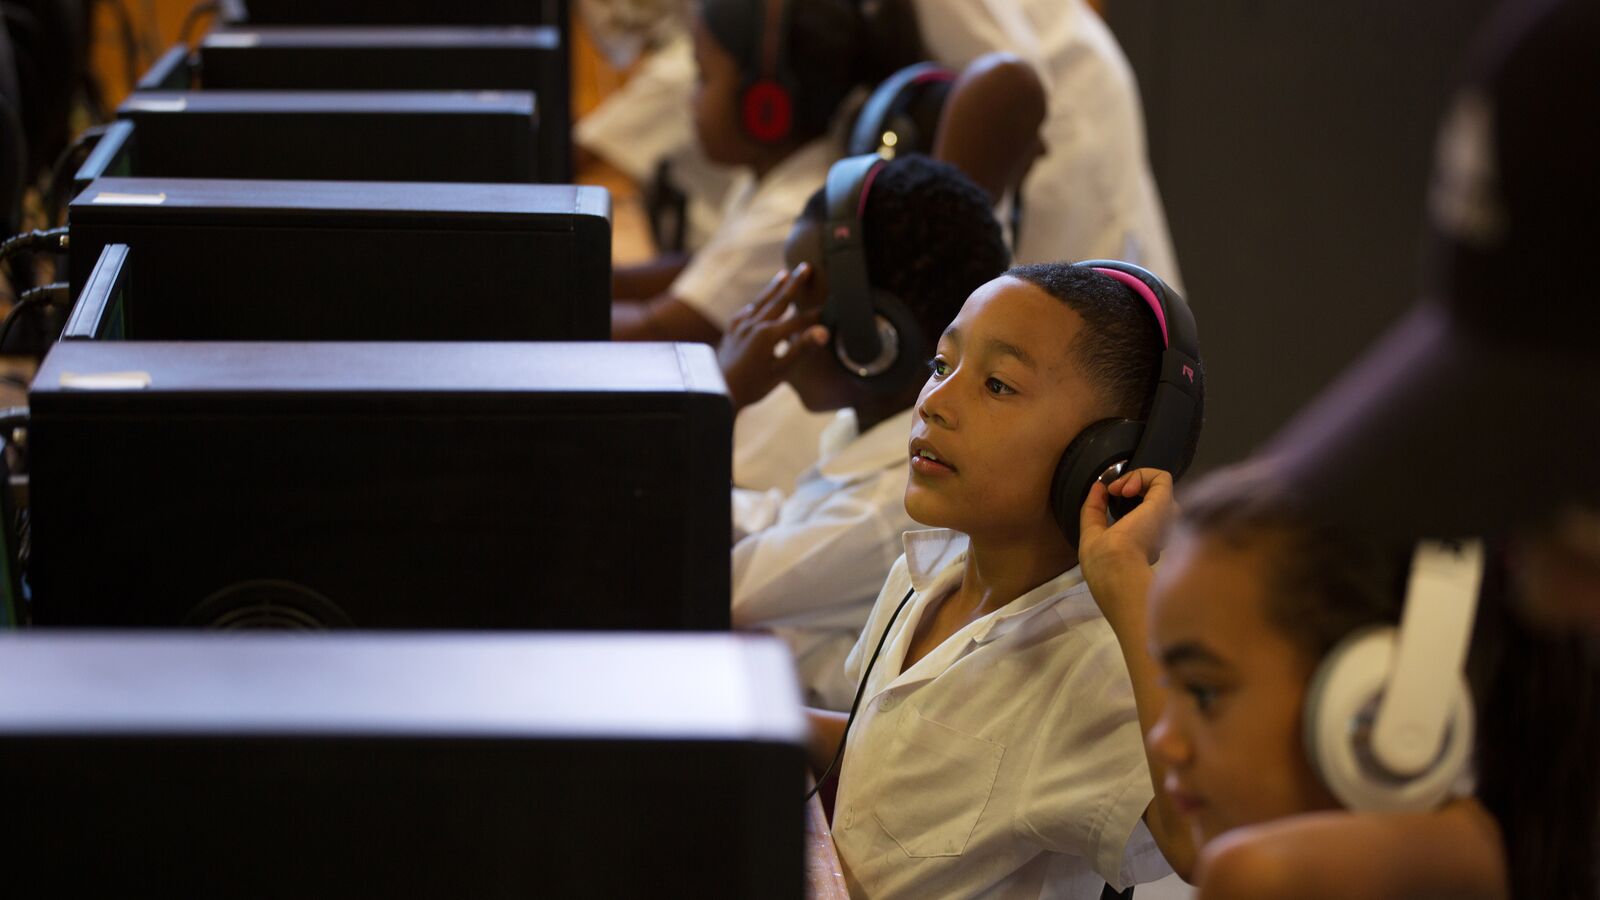 click-foundation-uses-technology-to-close-literacy-gap-south-africa